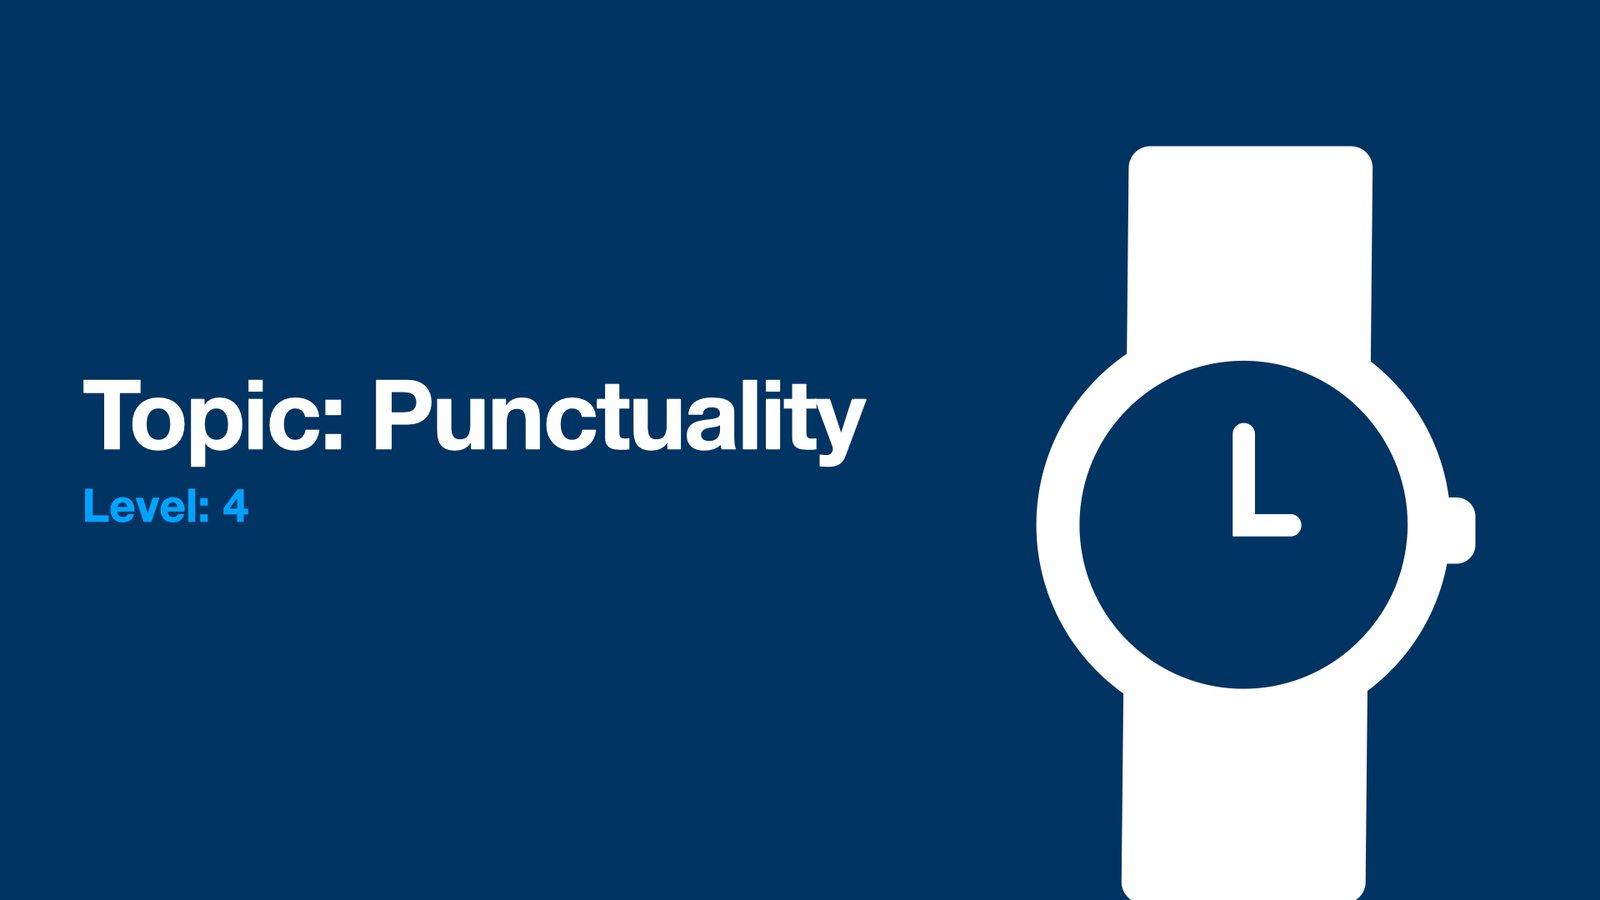 Educational slide about punctuality, level 4 with watch icon.